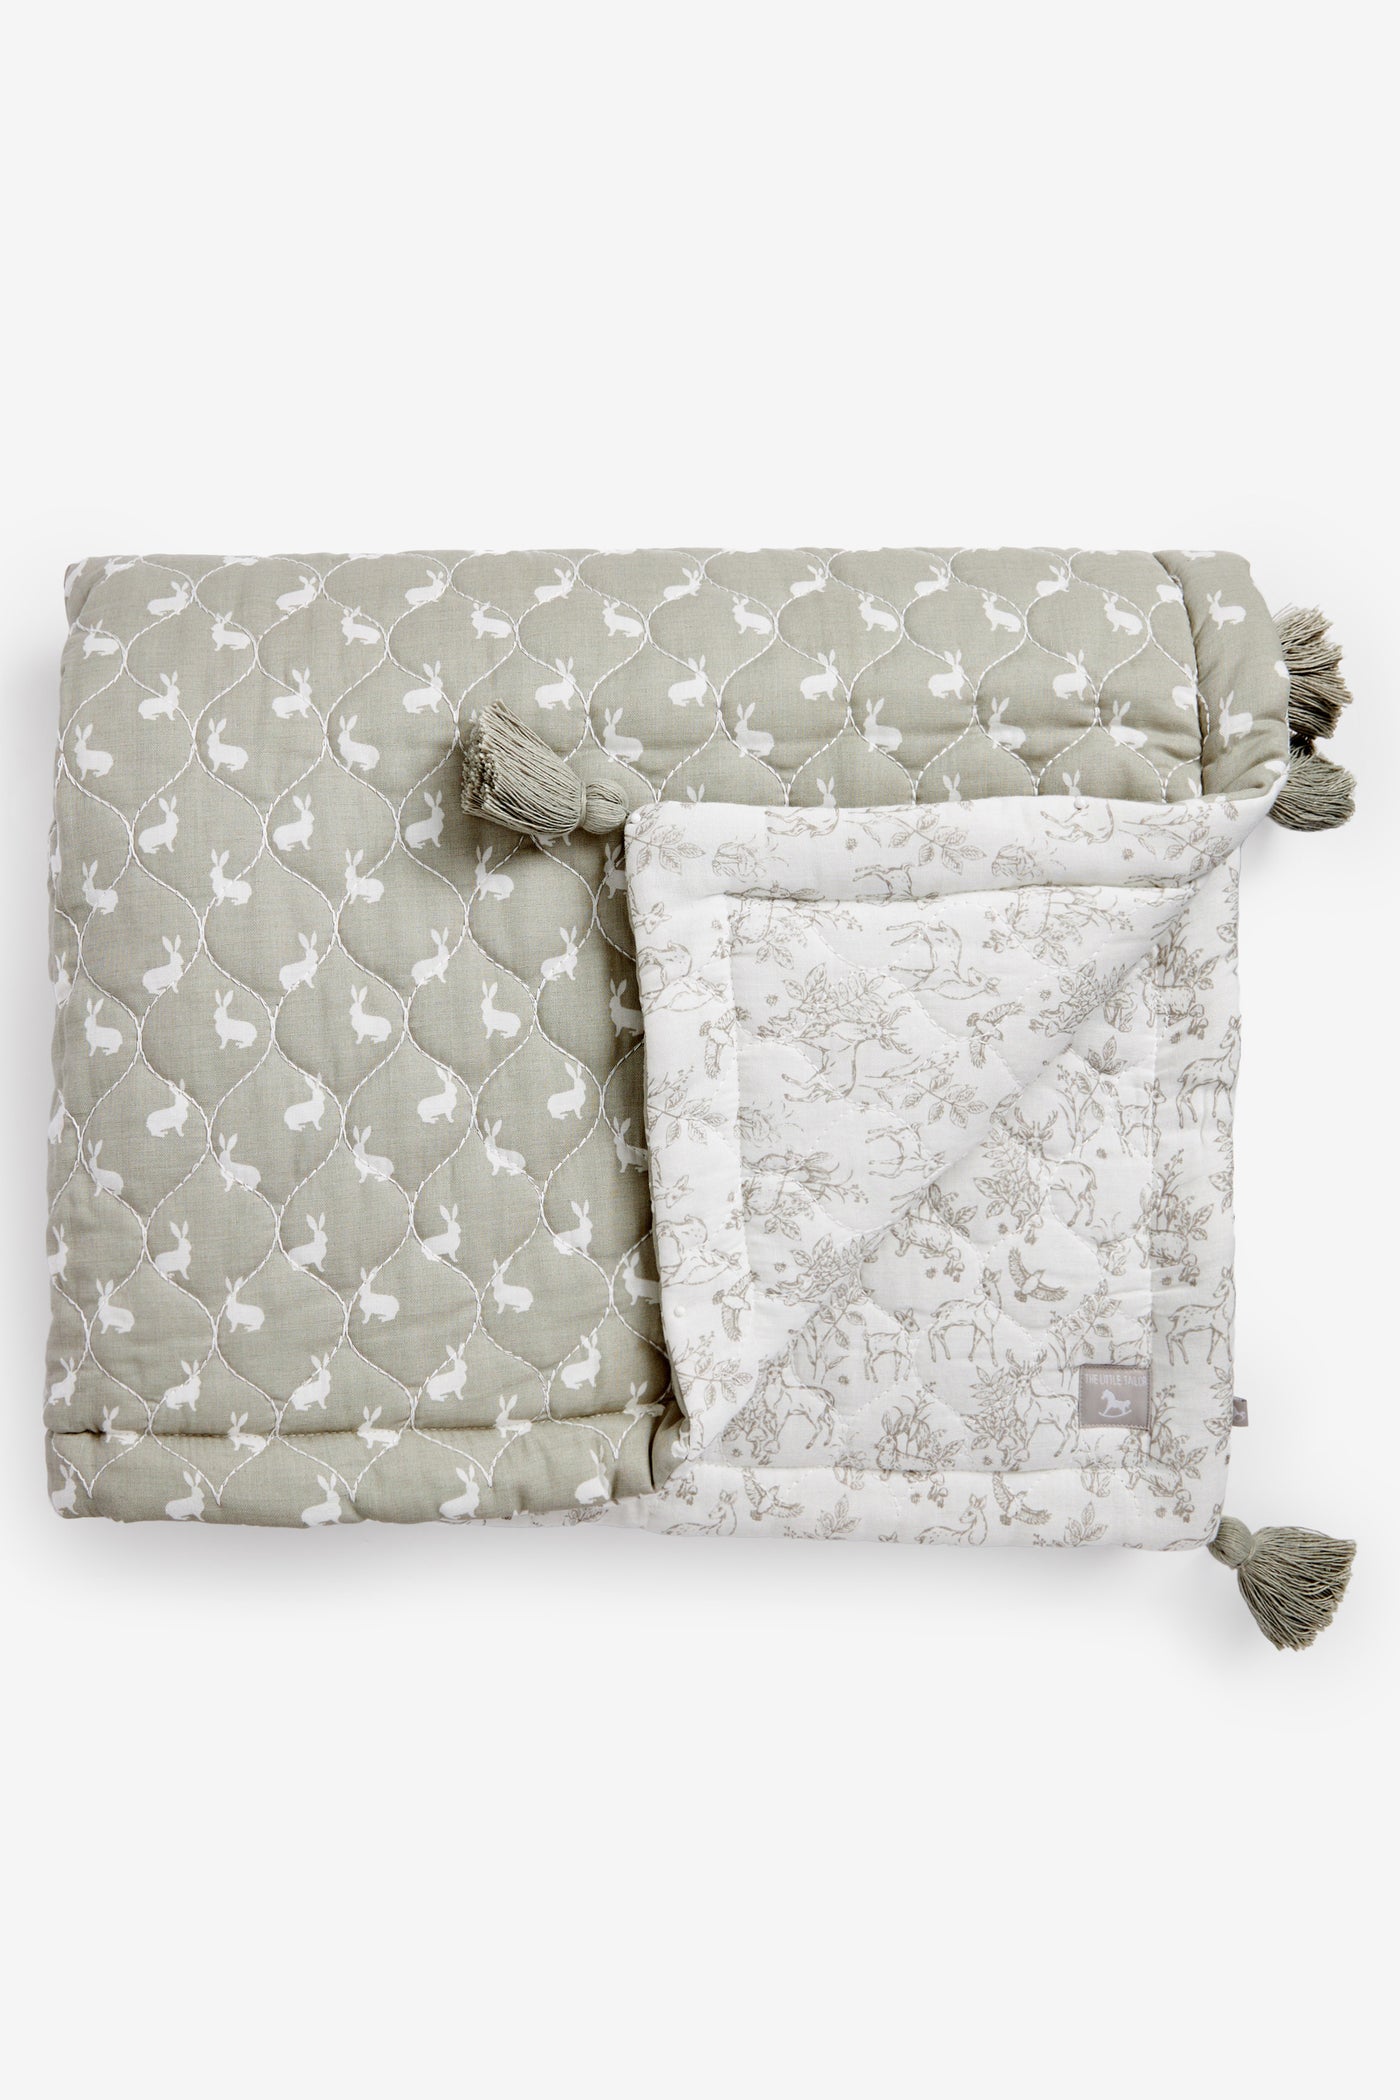 Padded Quilt, white woodland and fawn hare print